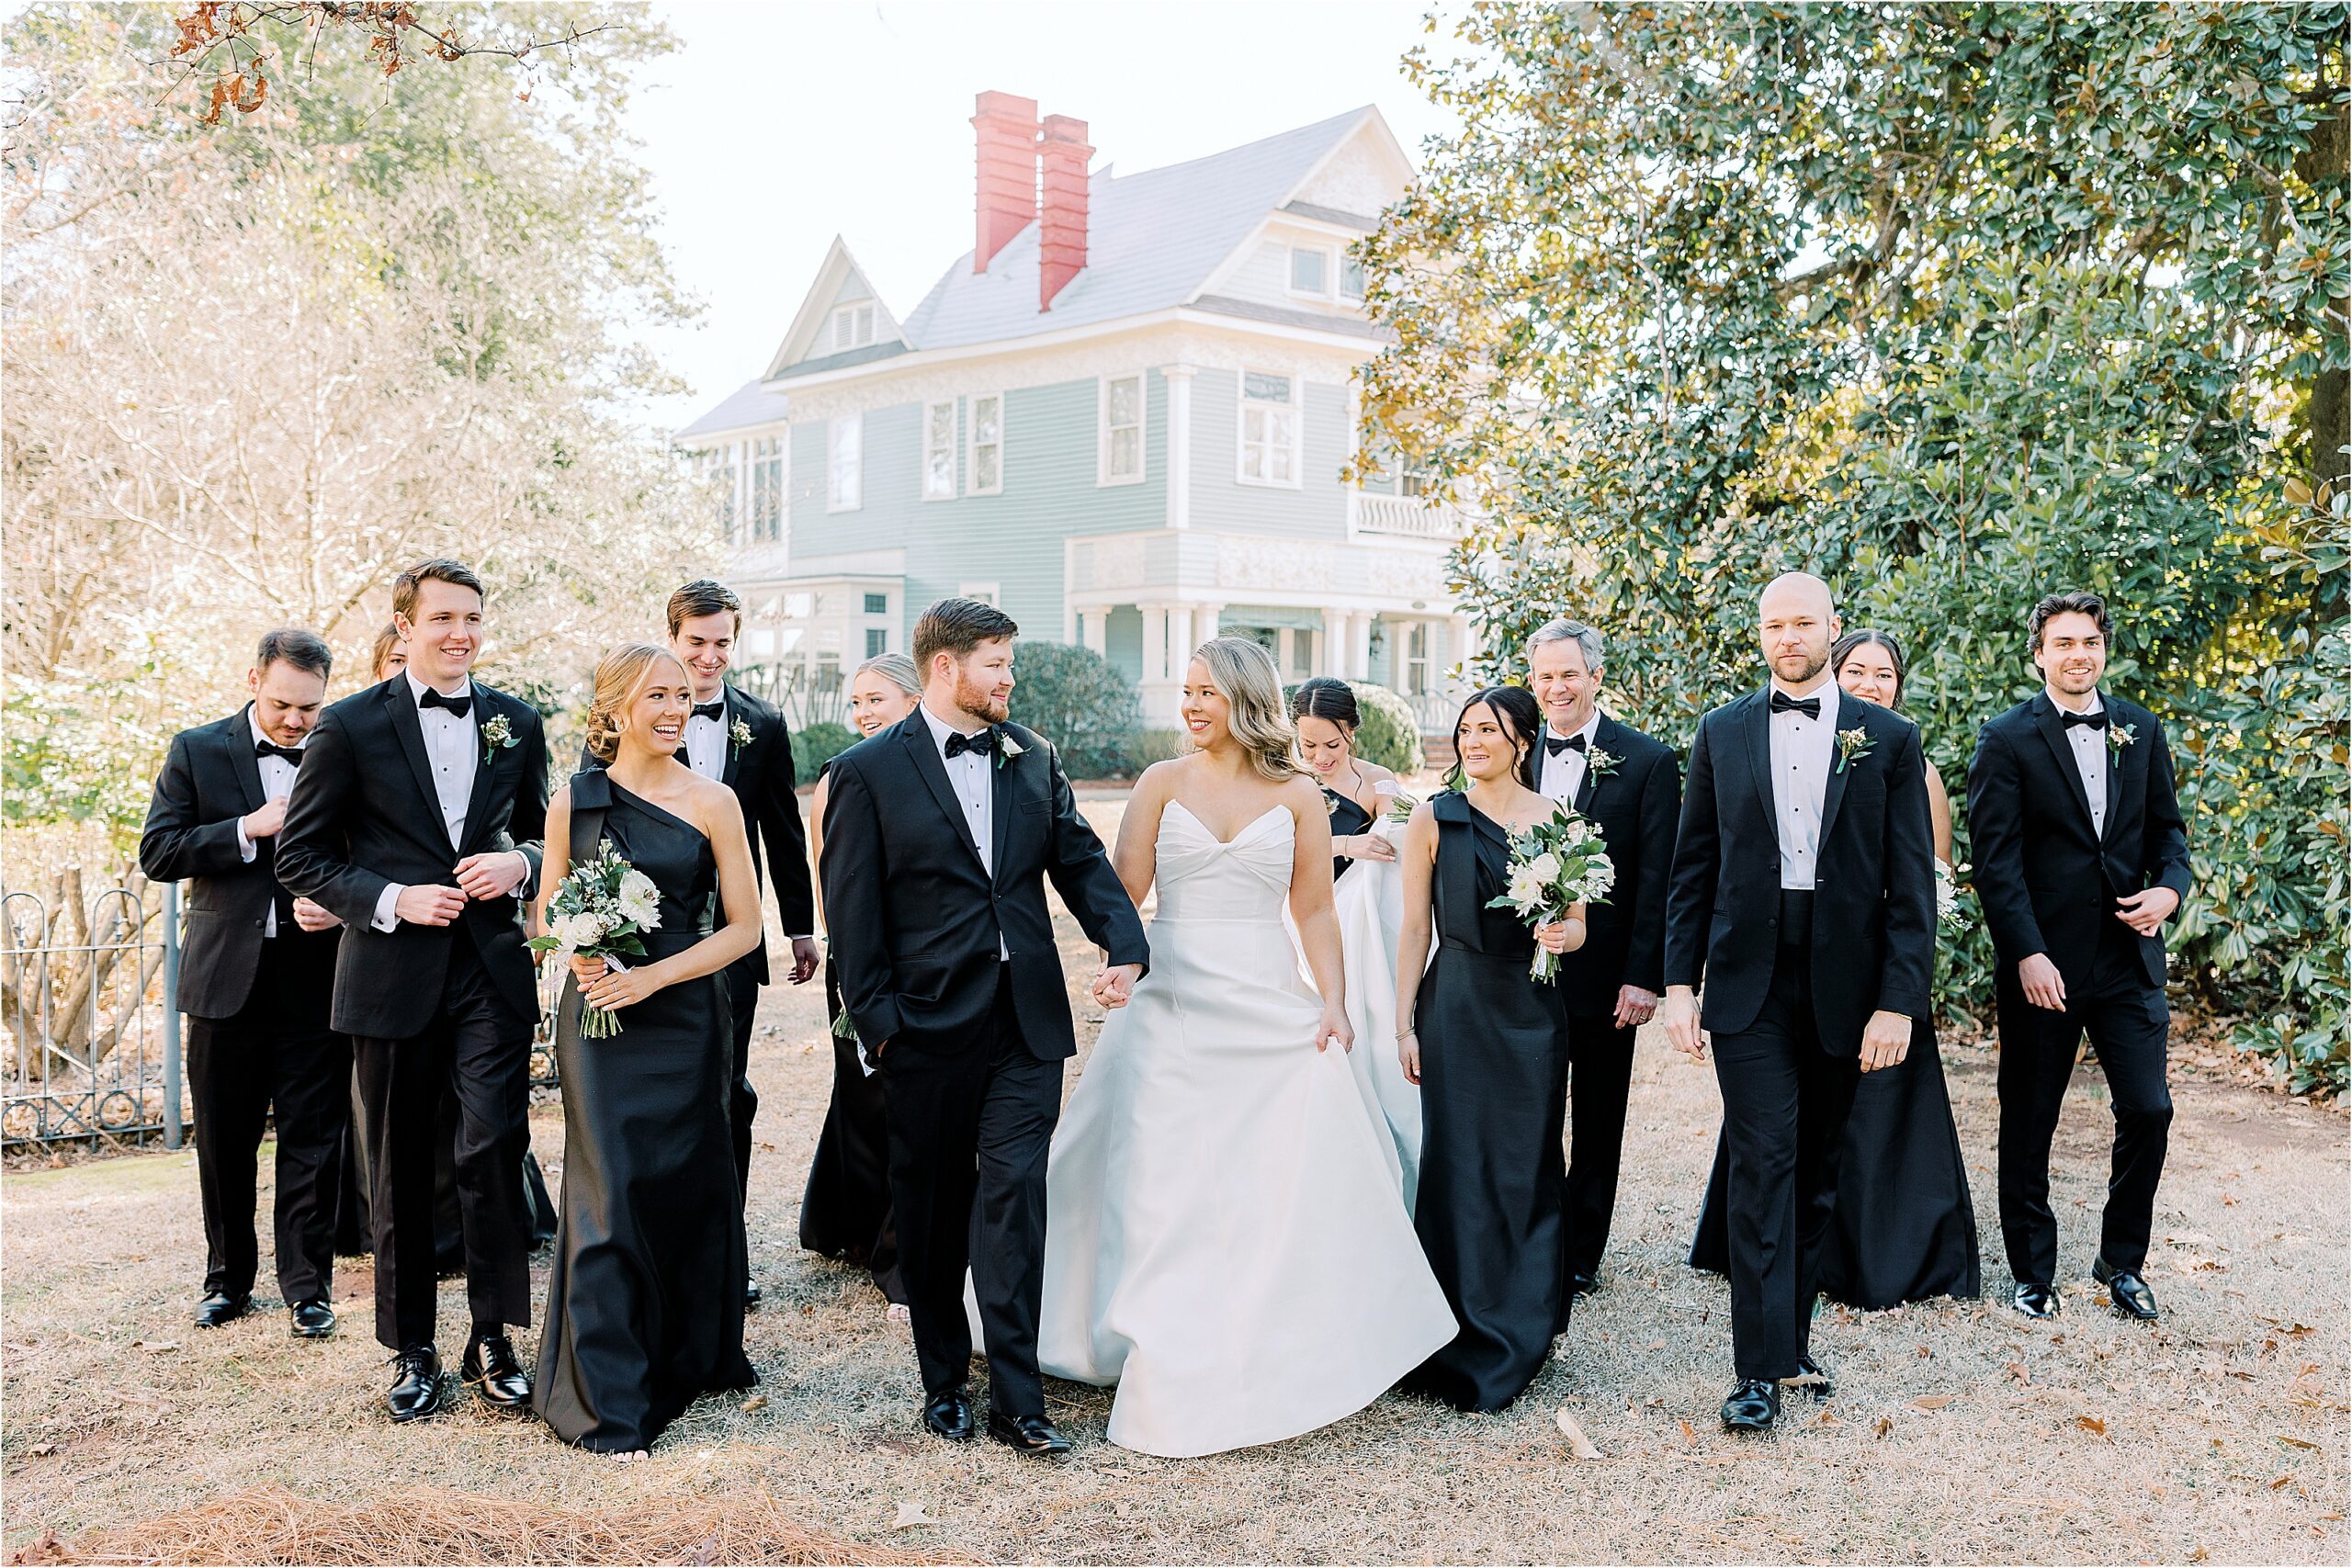 Bride and groom with bridal party dressed in black walking.